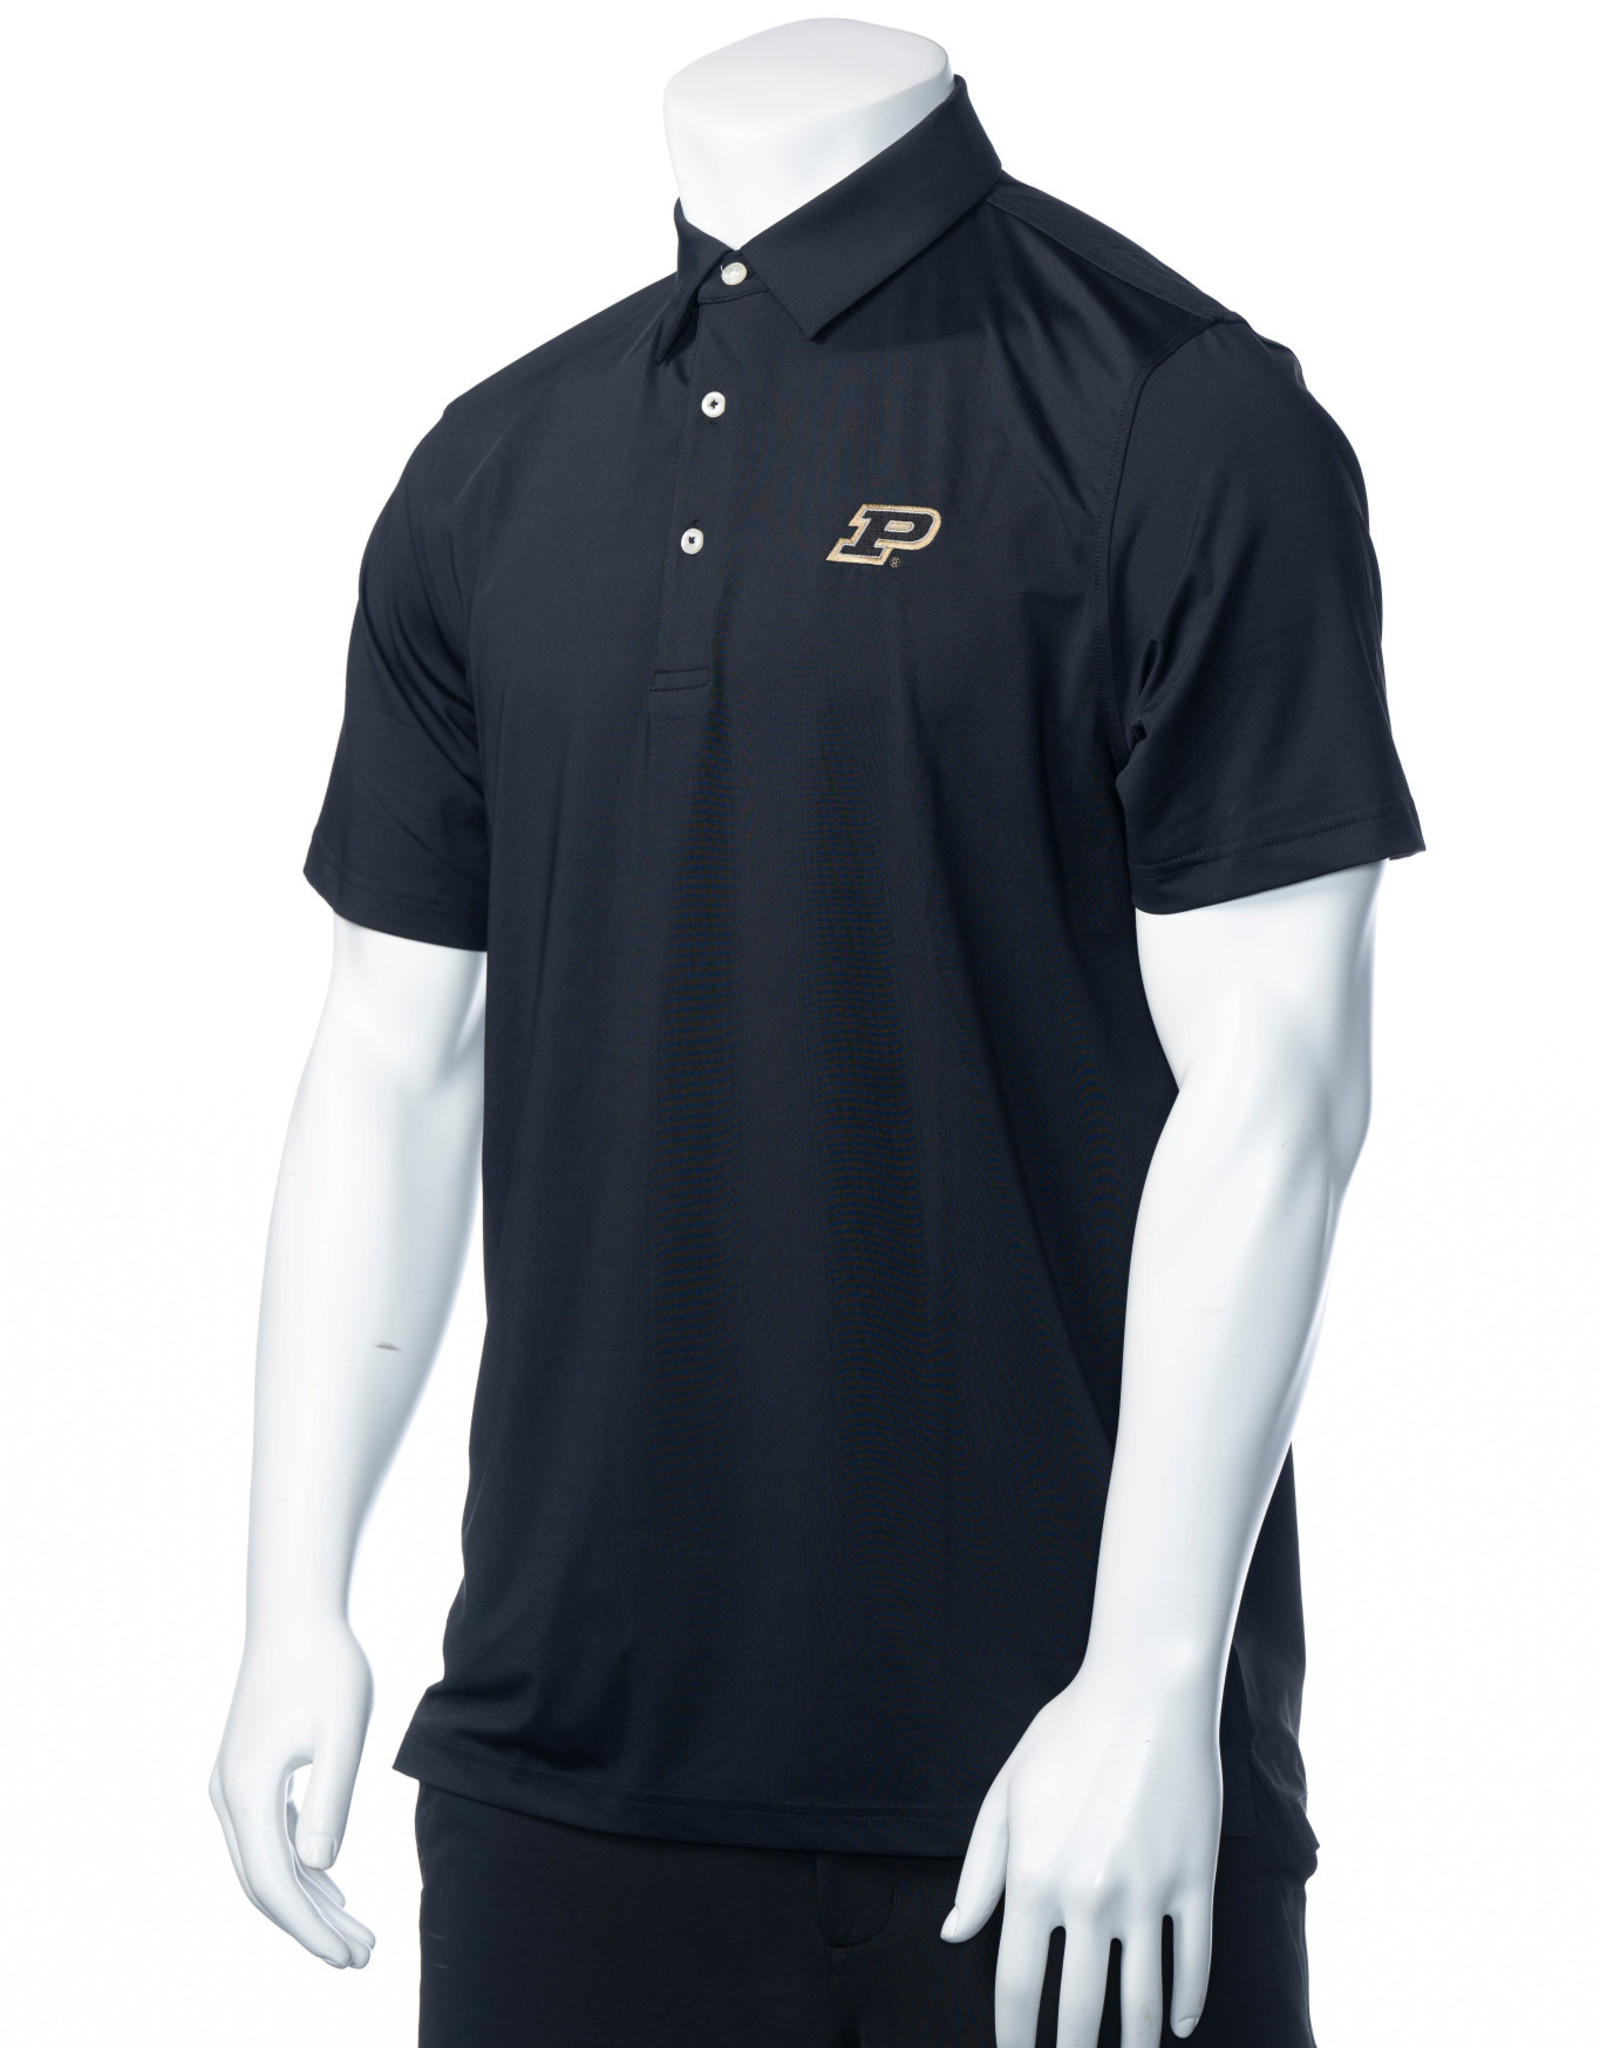 PURDUE COLLECTION PURDUE COLLECTION "THE CLASSIC" SOLID ECOTEC POLO